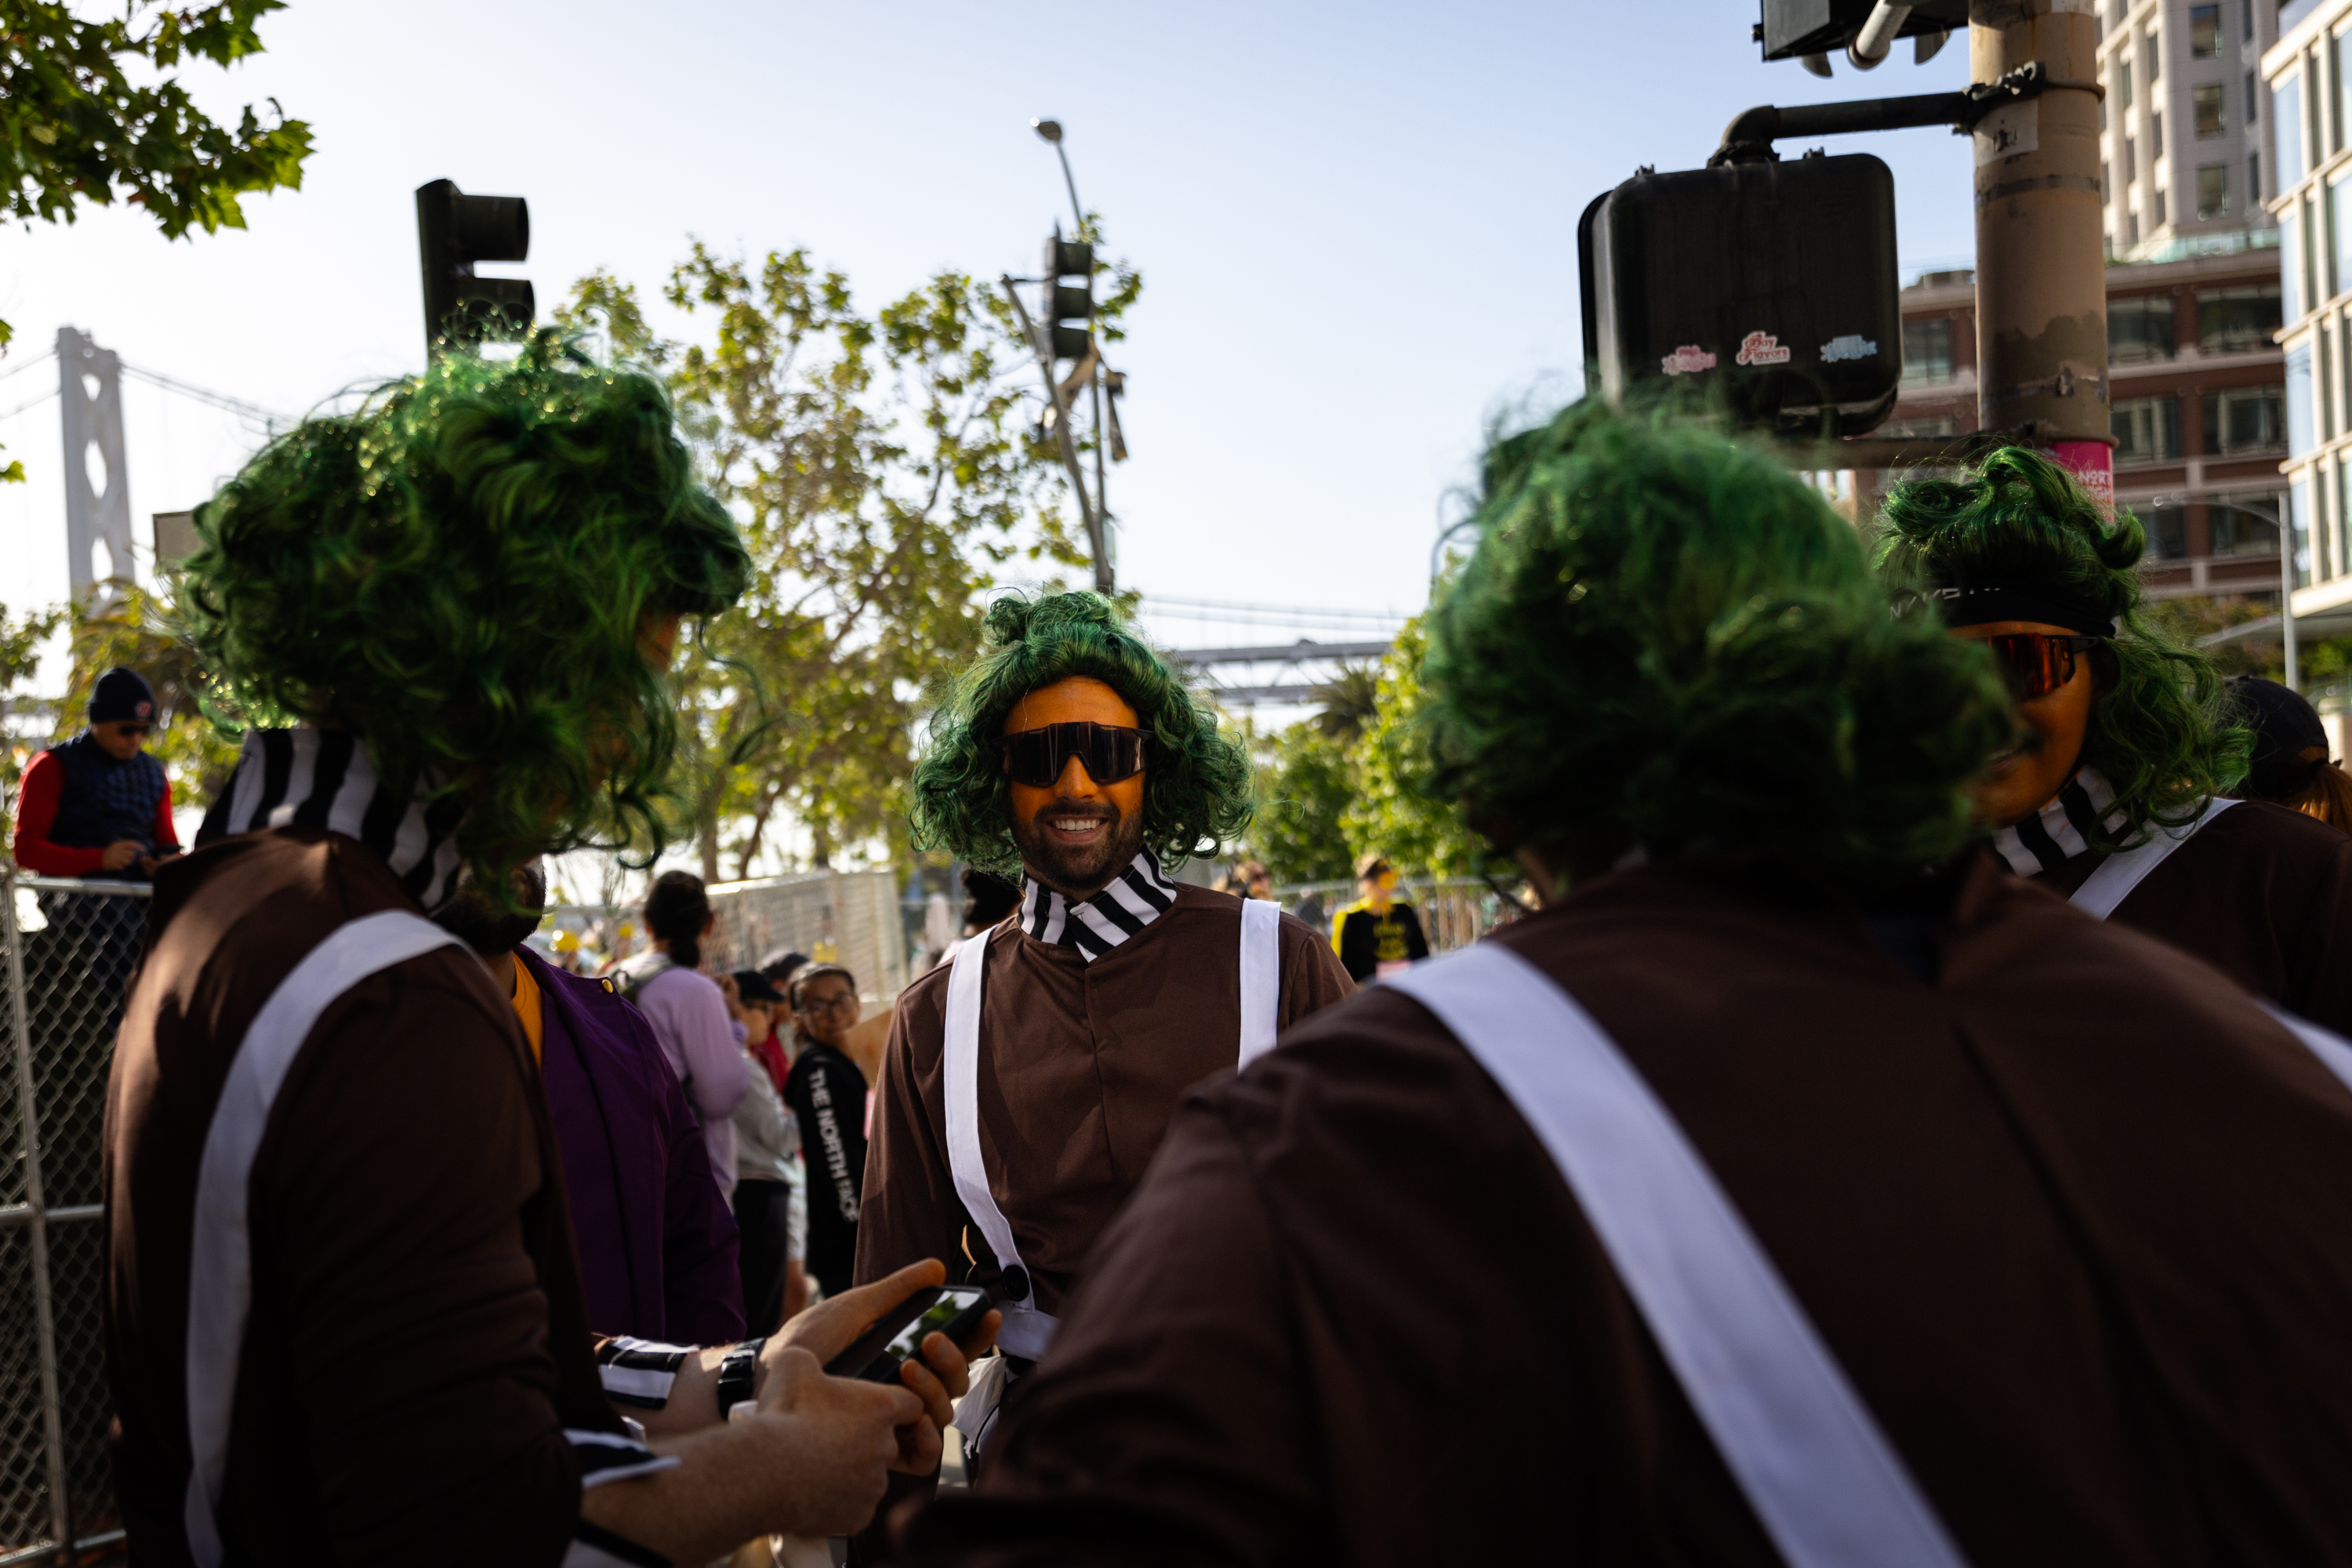 Brown costumed runners wearing long green wigs and sunglasses get ready to run a foot race